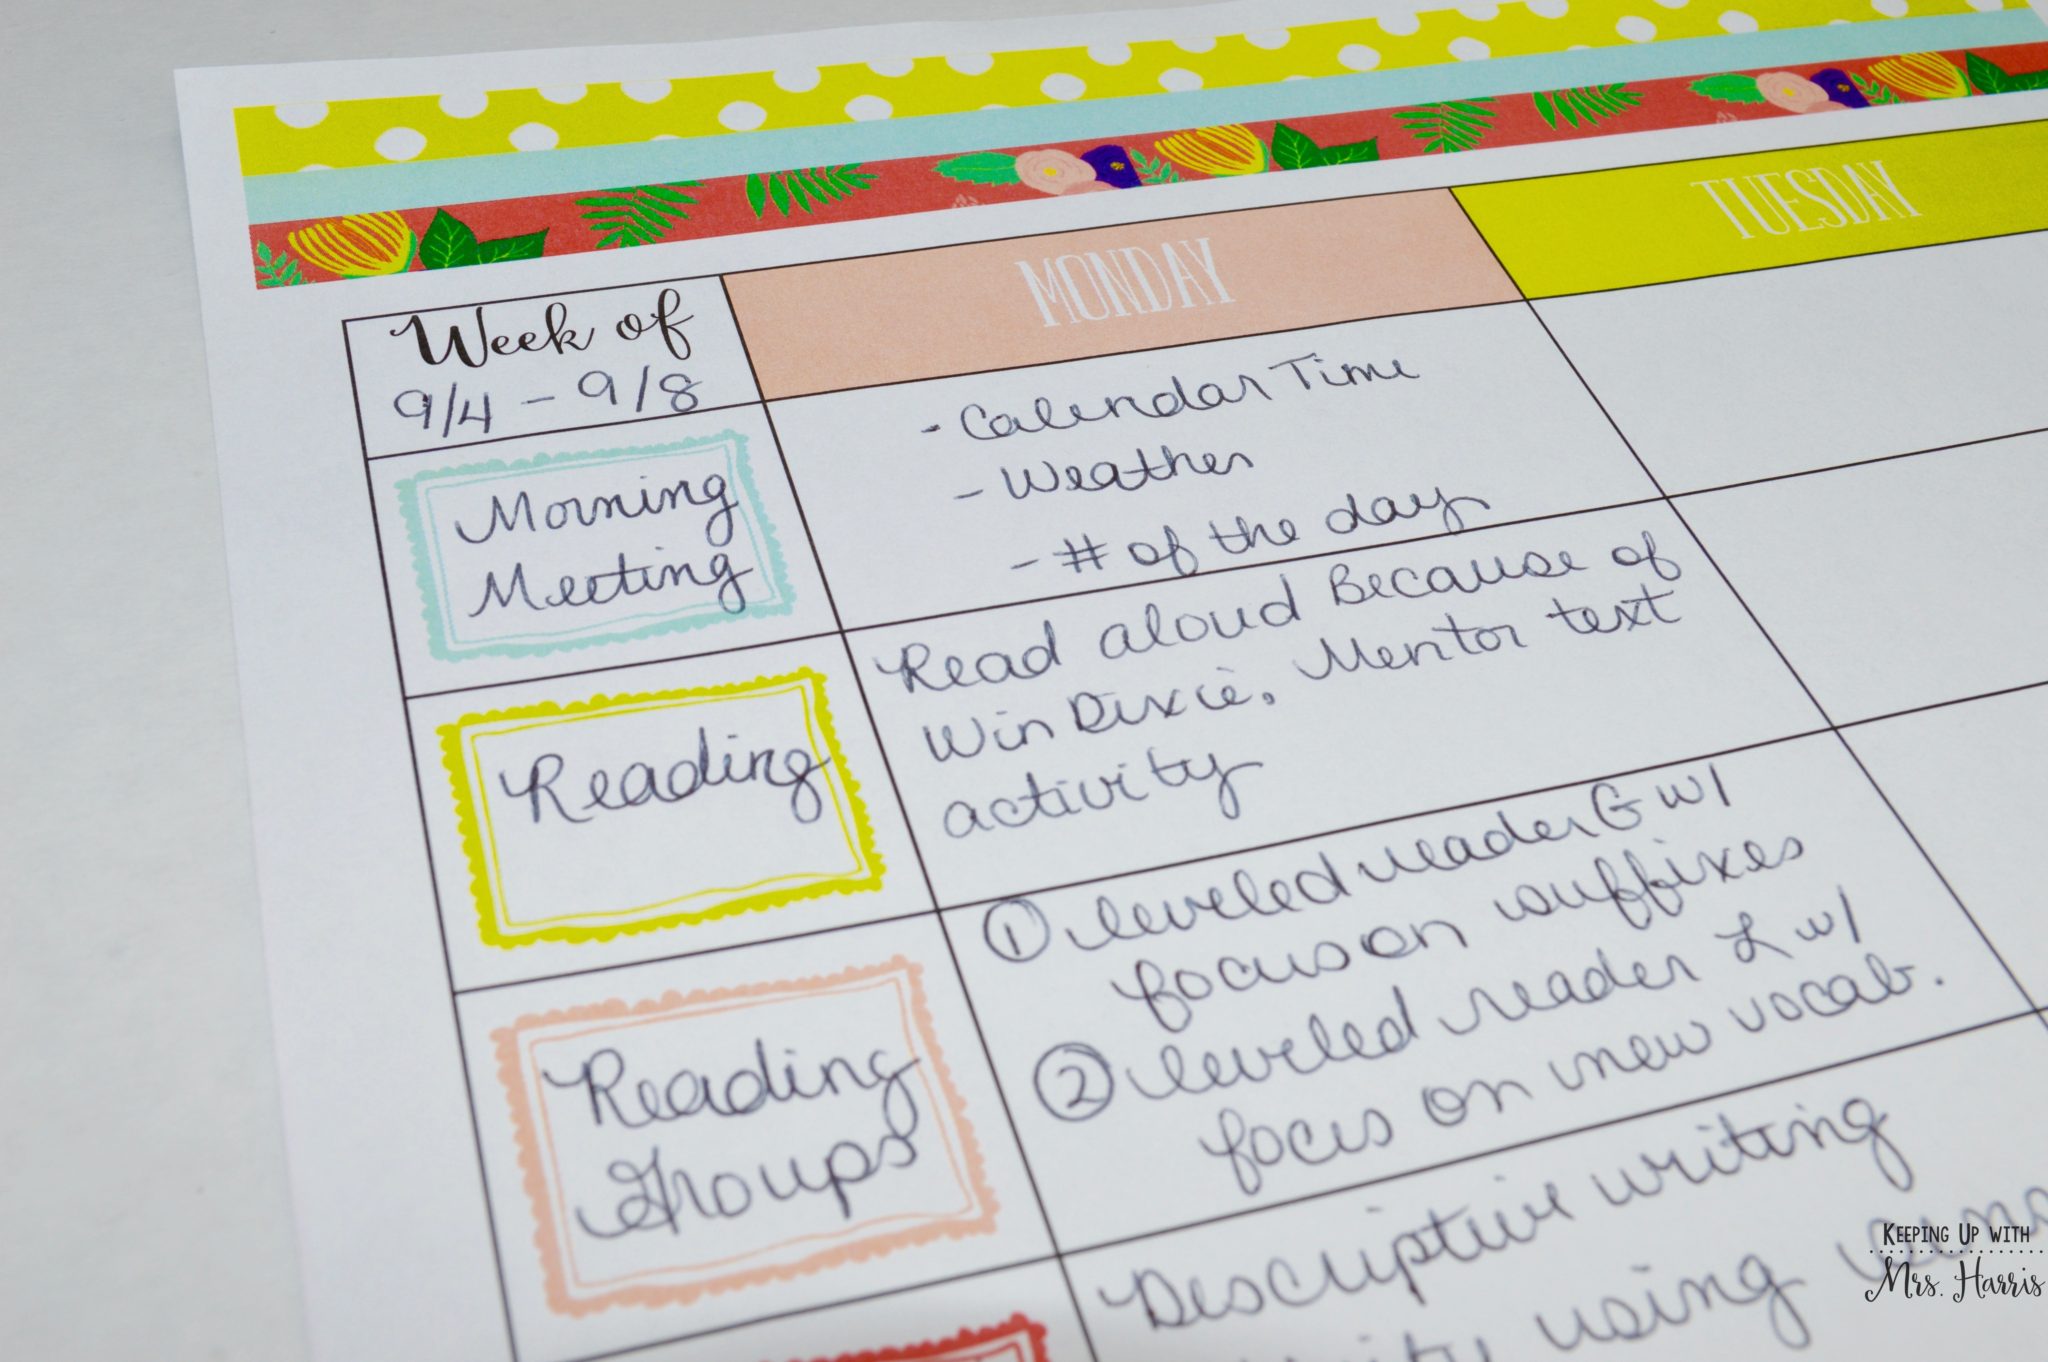 Teacher Planner - Let's get you organized for the new year!